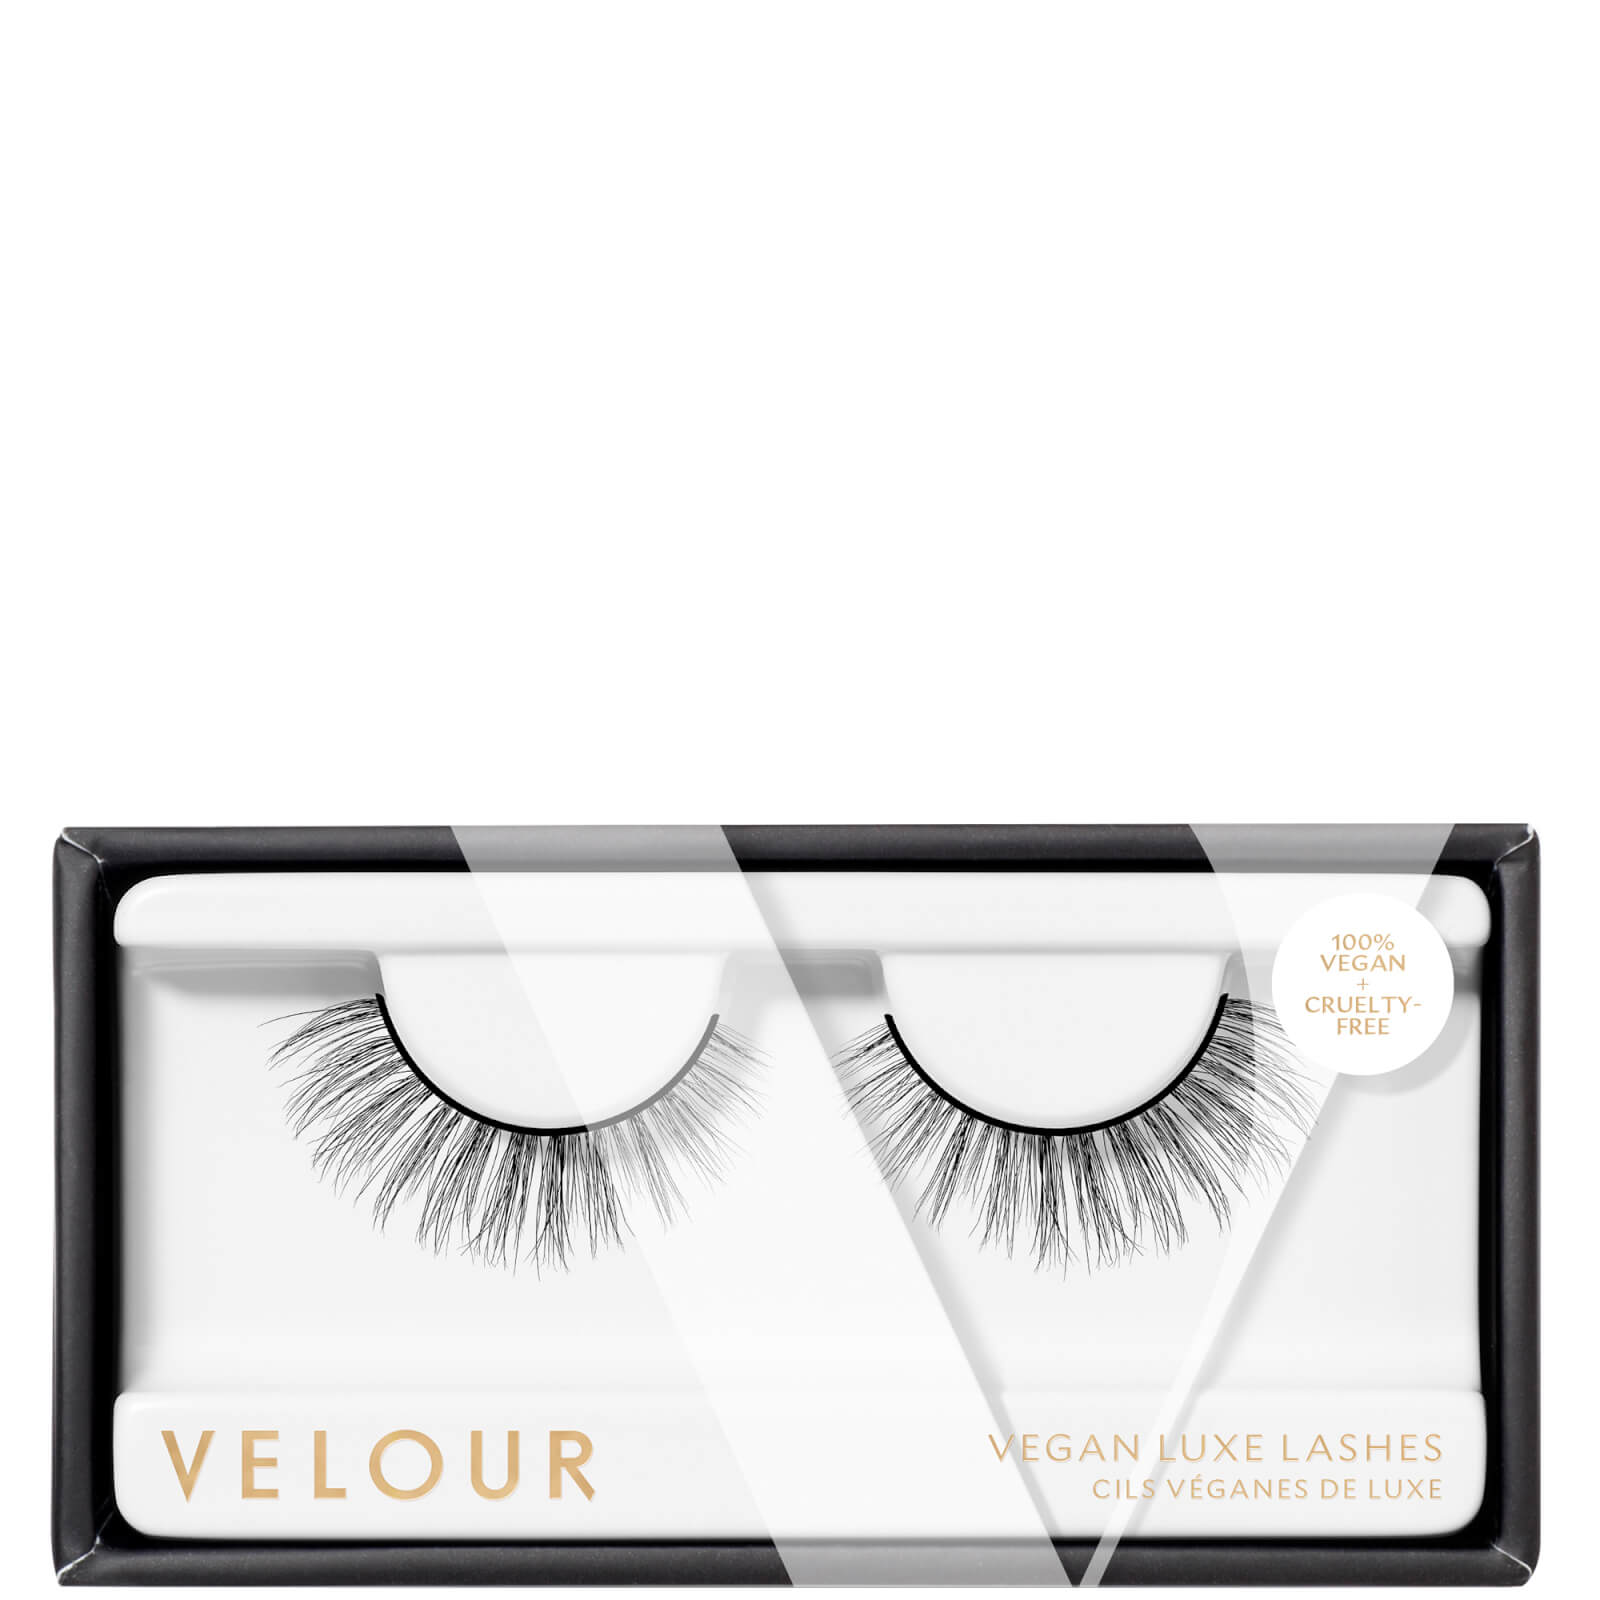 Velour Lashes Vegan Luxe Are Those Real Lashes